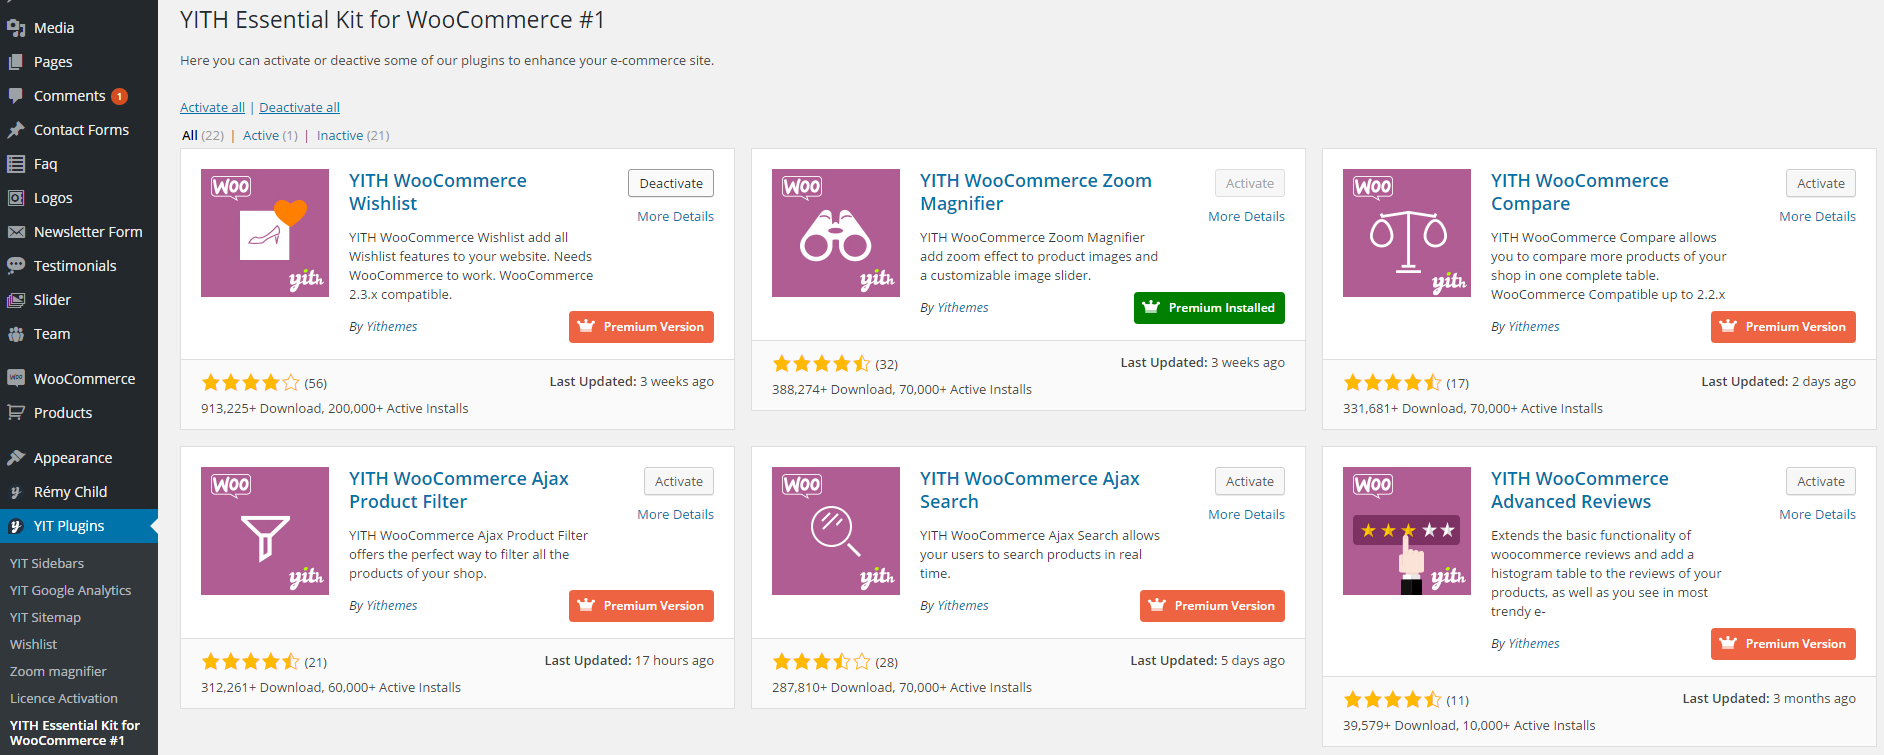 YITH Essential Kit for WooCommerce #1 Download Free Wordpress Plugin 4